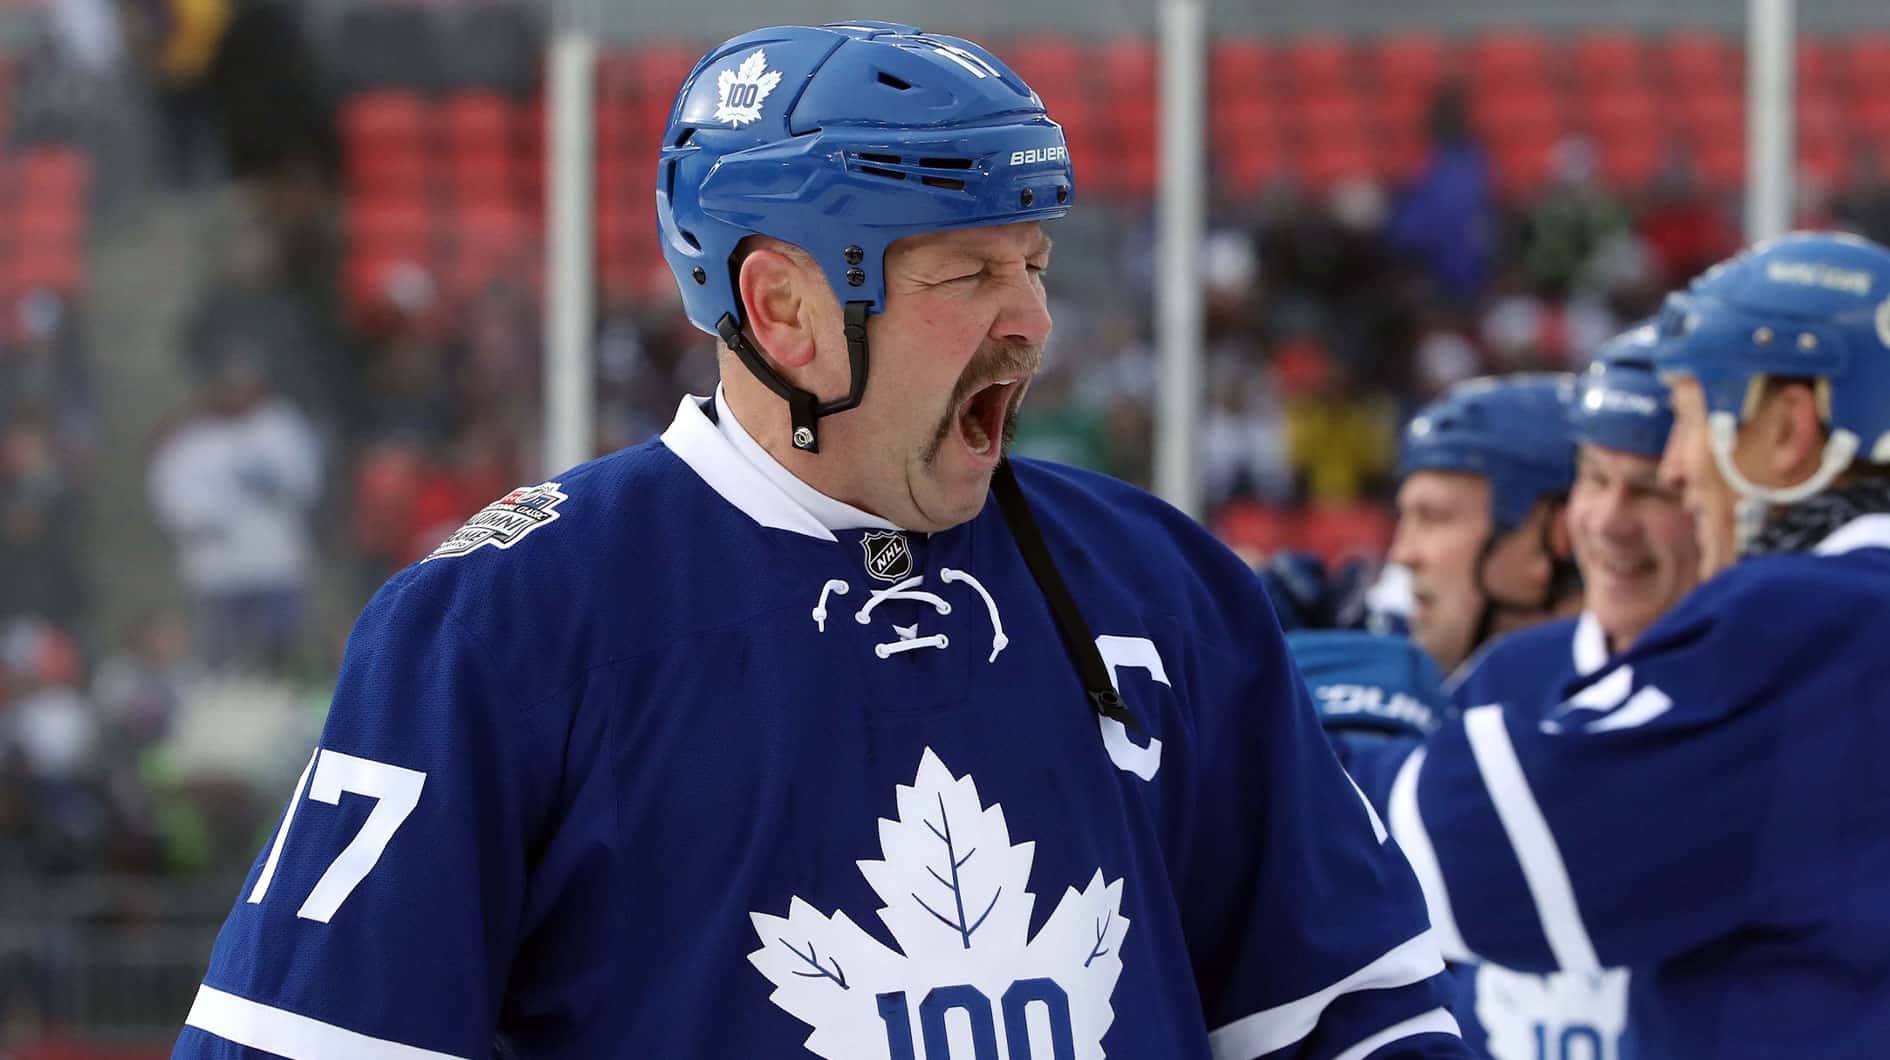 Toronto Maple Leafs forward Wendel Clark (17) yawns before the start of their game against the Detroit Red Wings during the 2017 Rogers NHL Centennial Classic Alumni Game at BMO Field. The Red Wings beat the Maple Leafs 4-3.